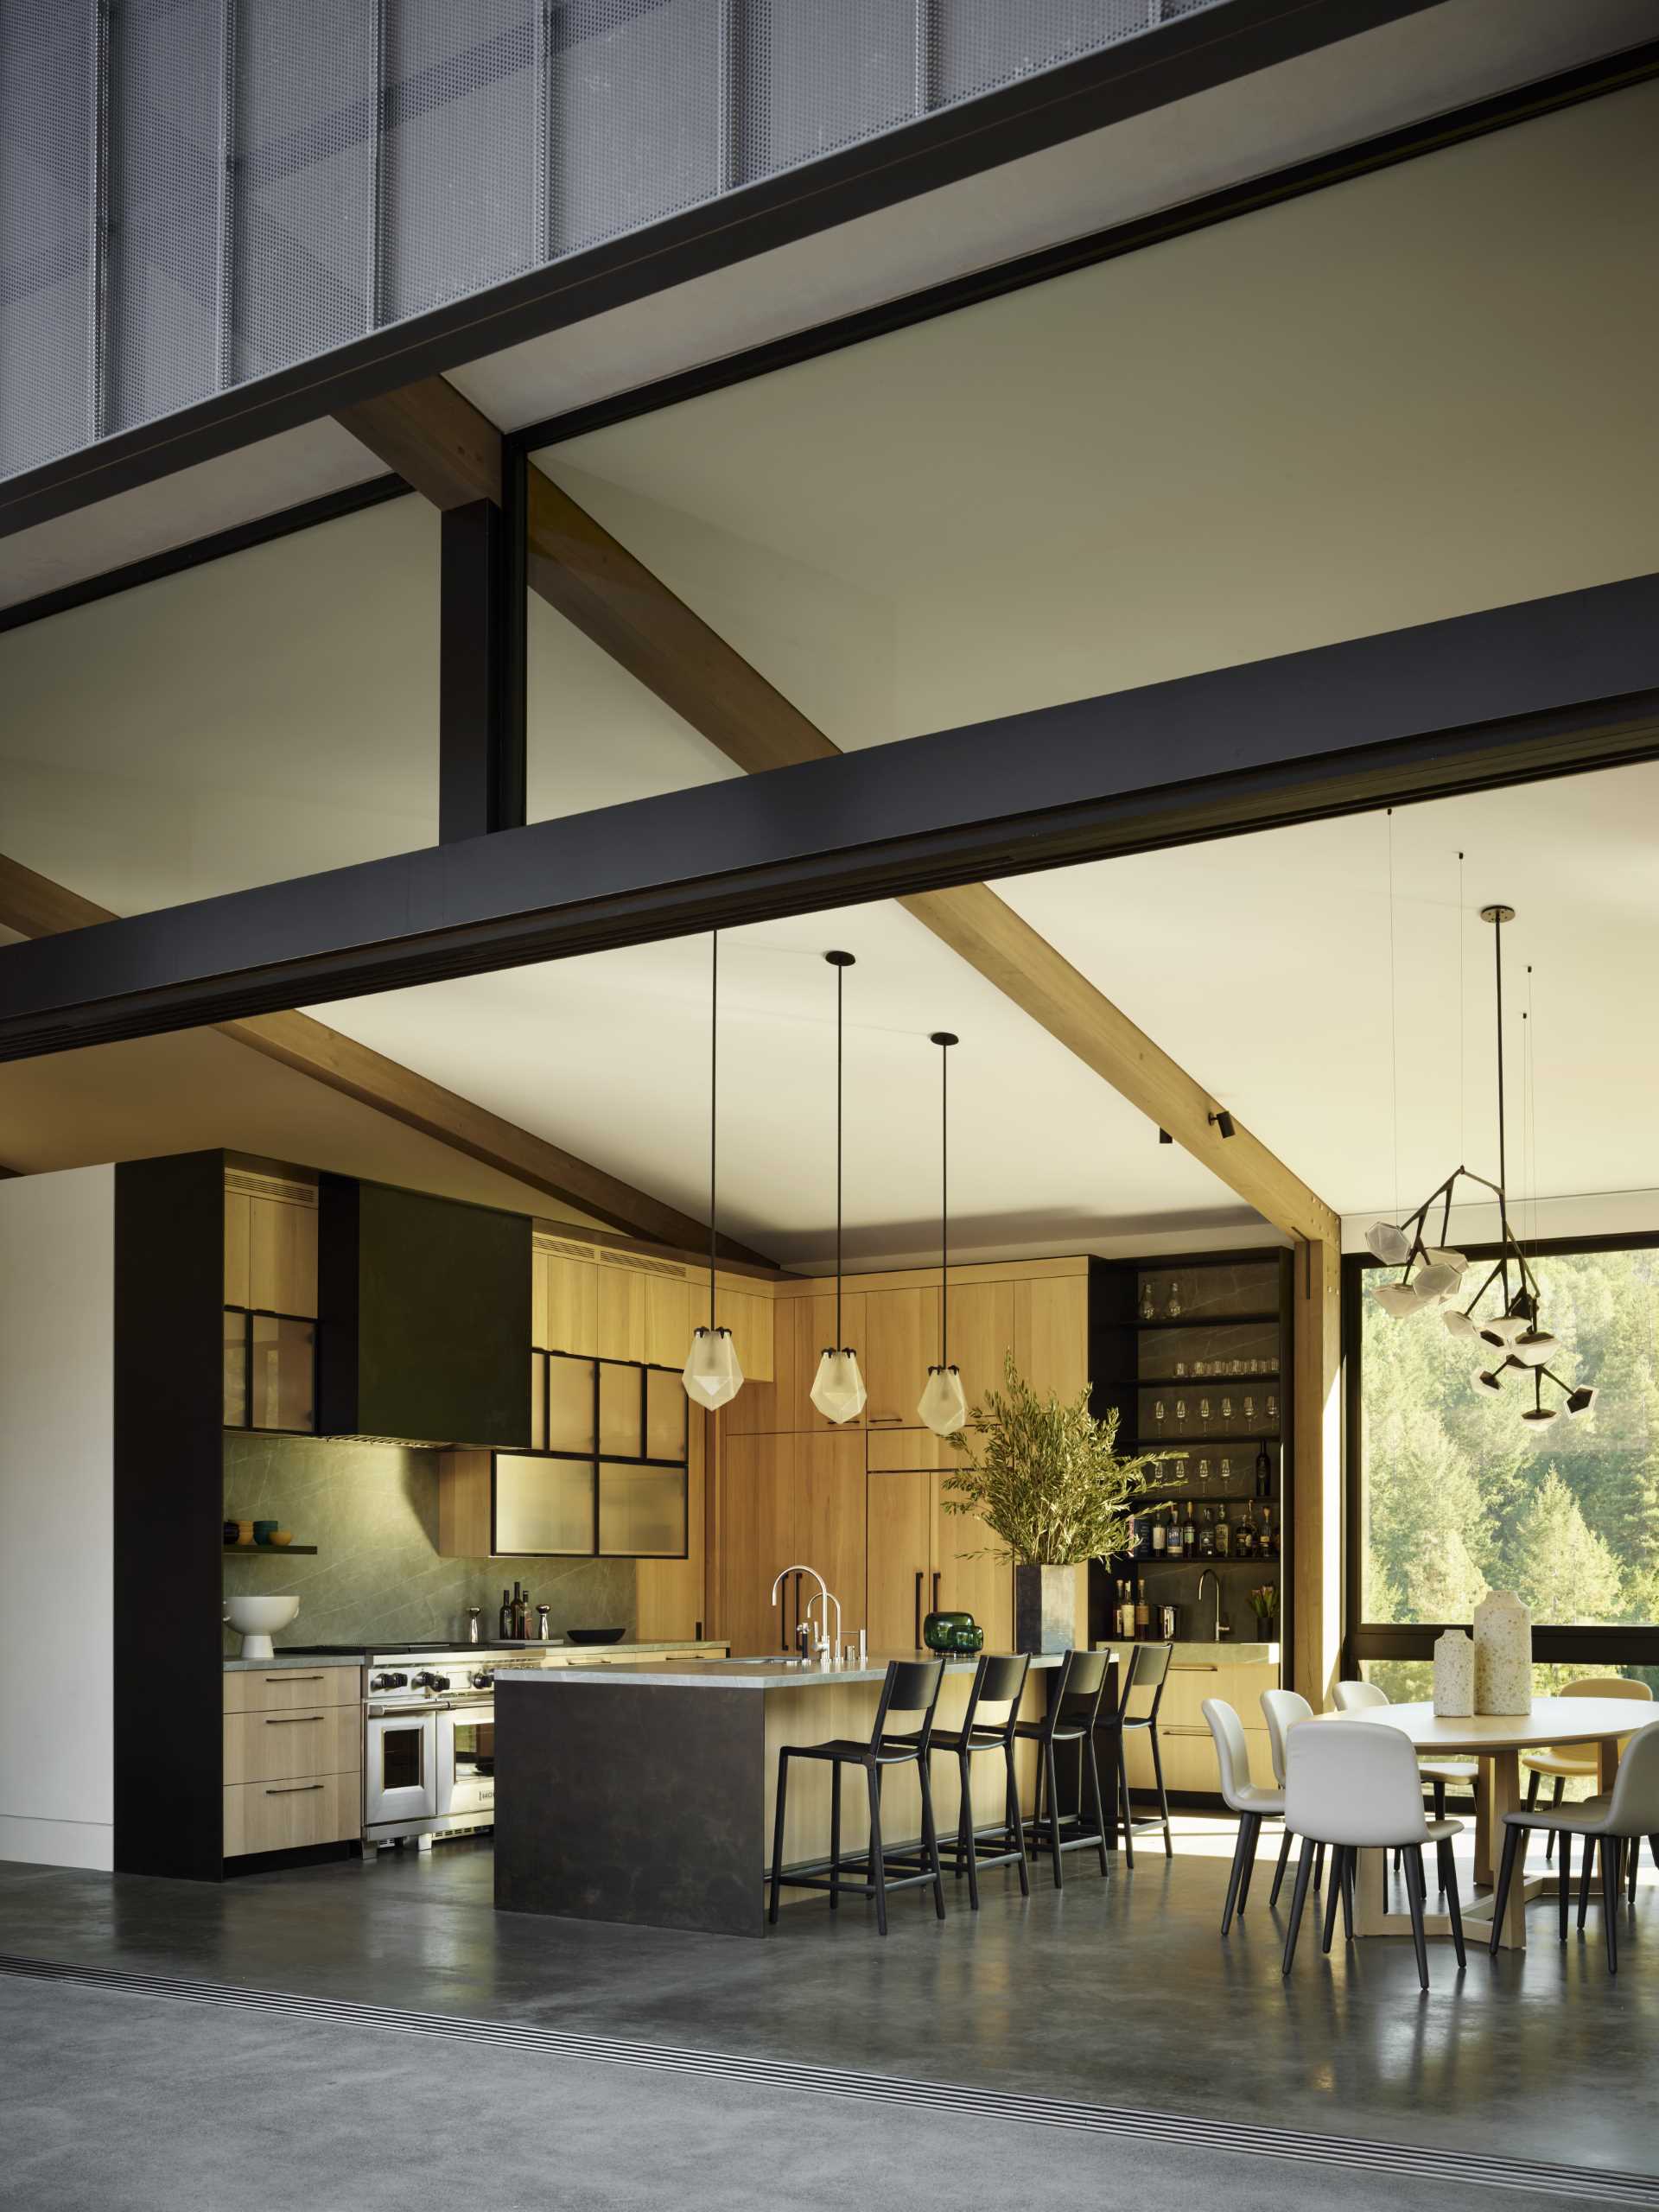 Inside this modern home, there's a great room with a living area, dining area, and kitchen, which also features features a pitched ceiling and exposed wood beams.